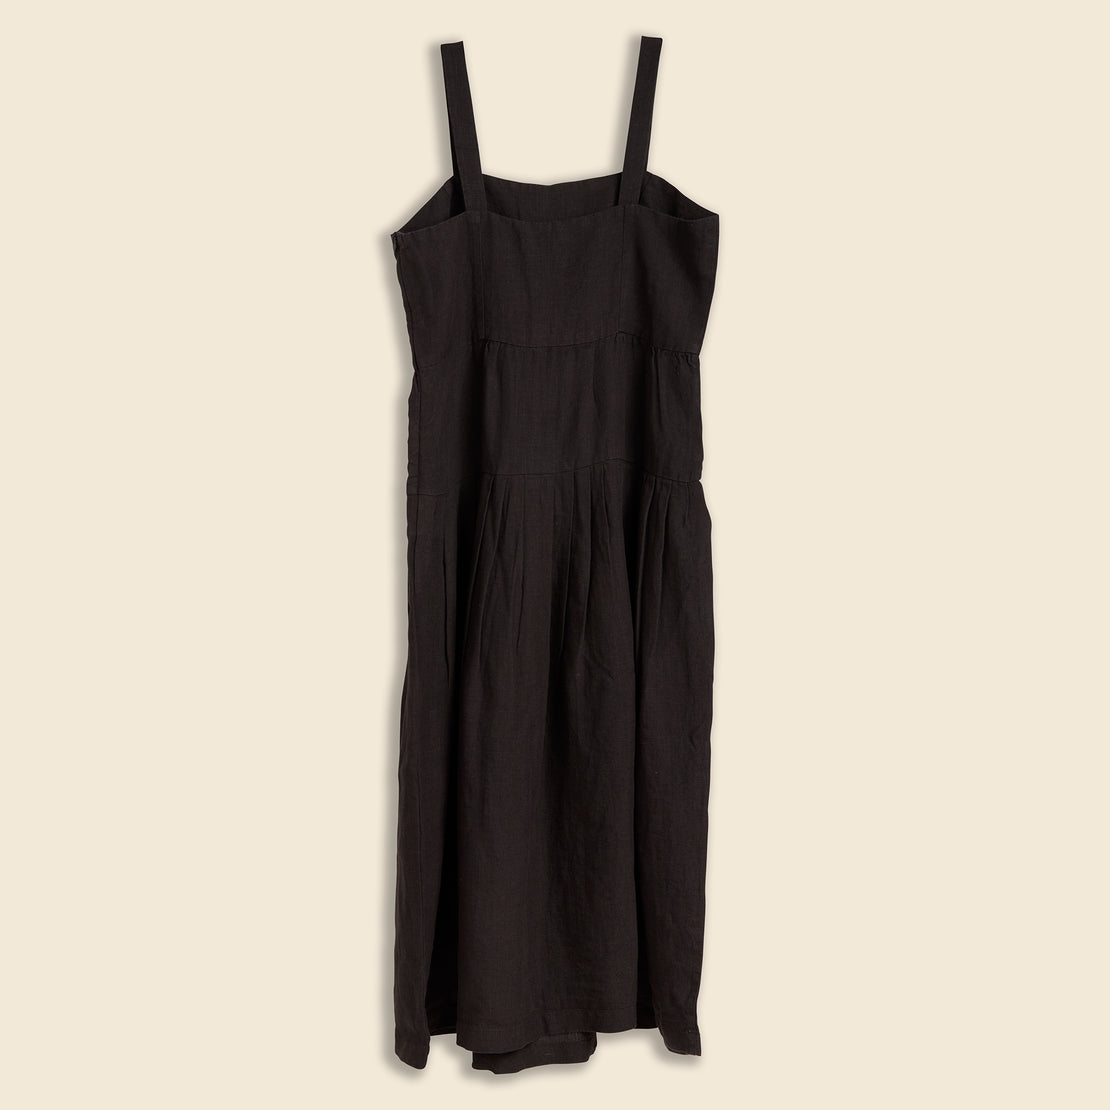 Amar Dress - Black - First Rite - STAG Provisions - W - Onepiece - Dress